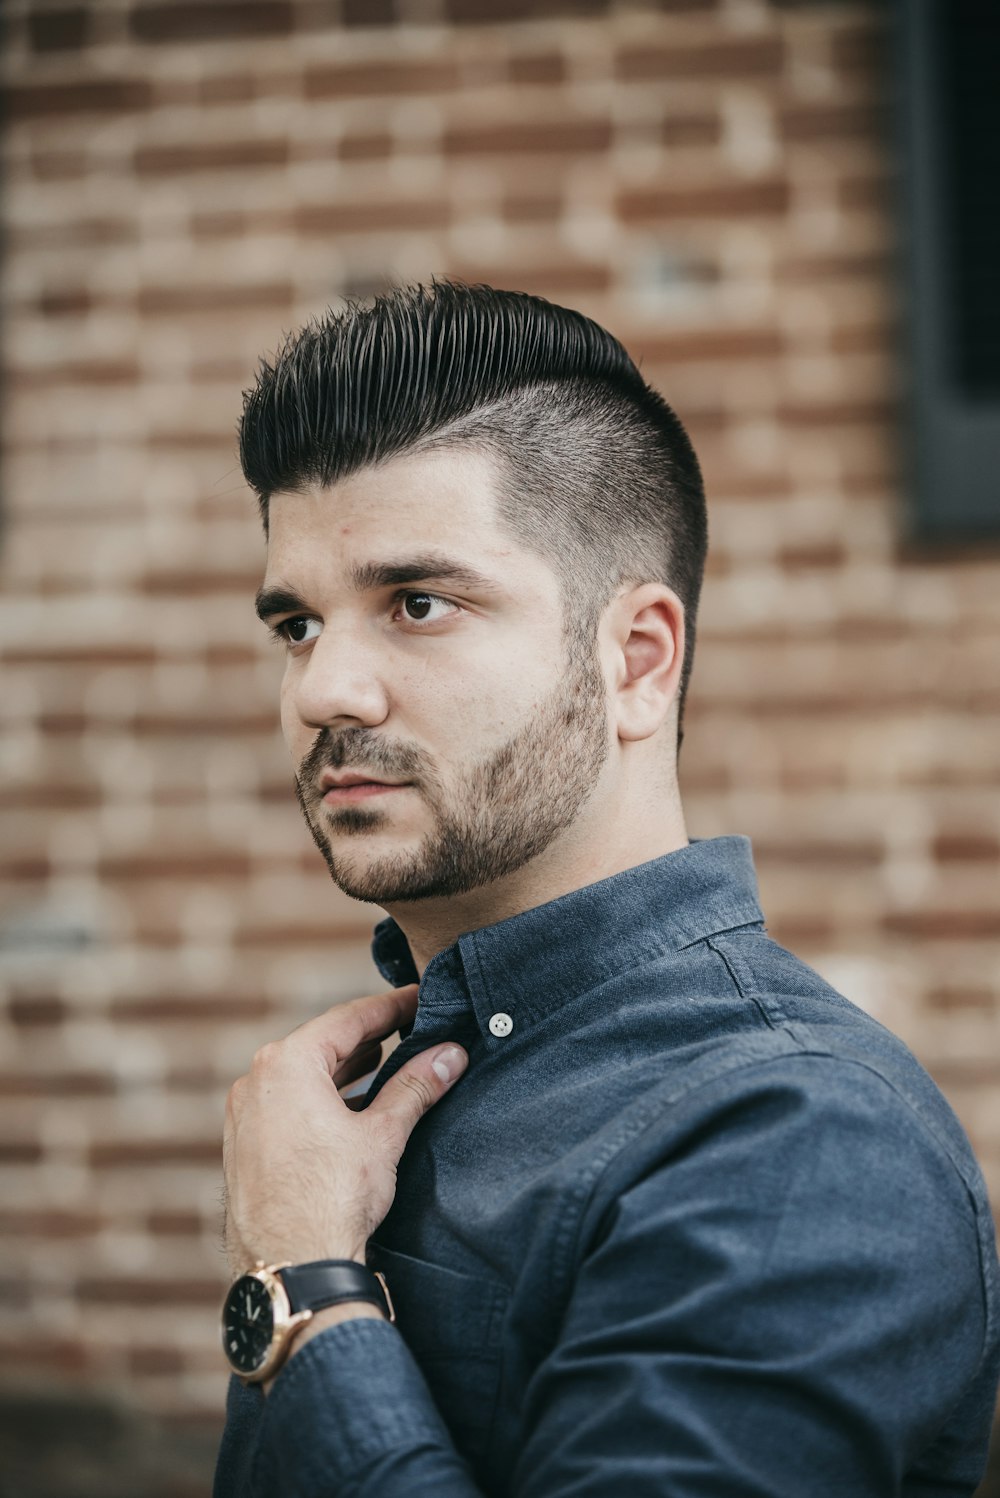 Hairstyle Men Pictures | Download Free Images on Unsplash